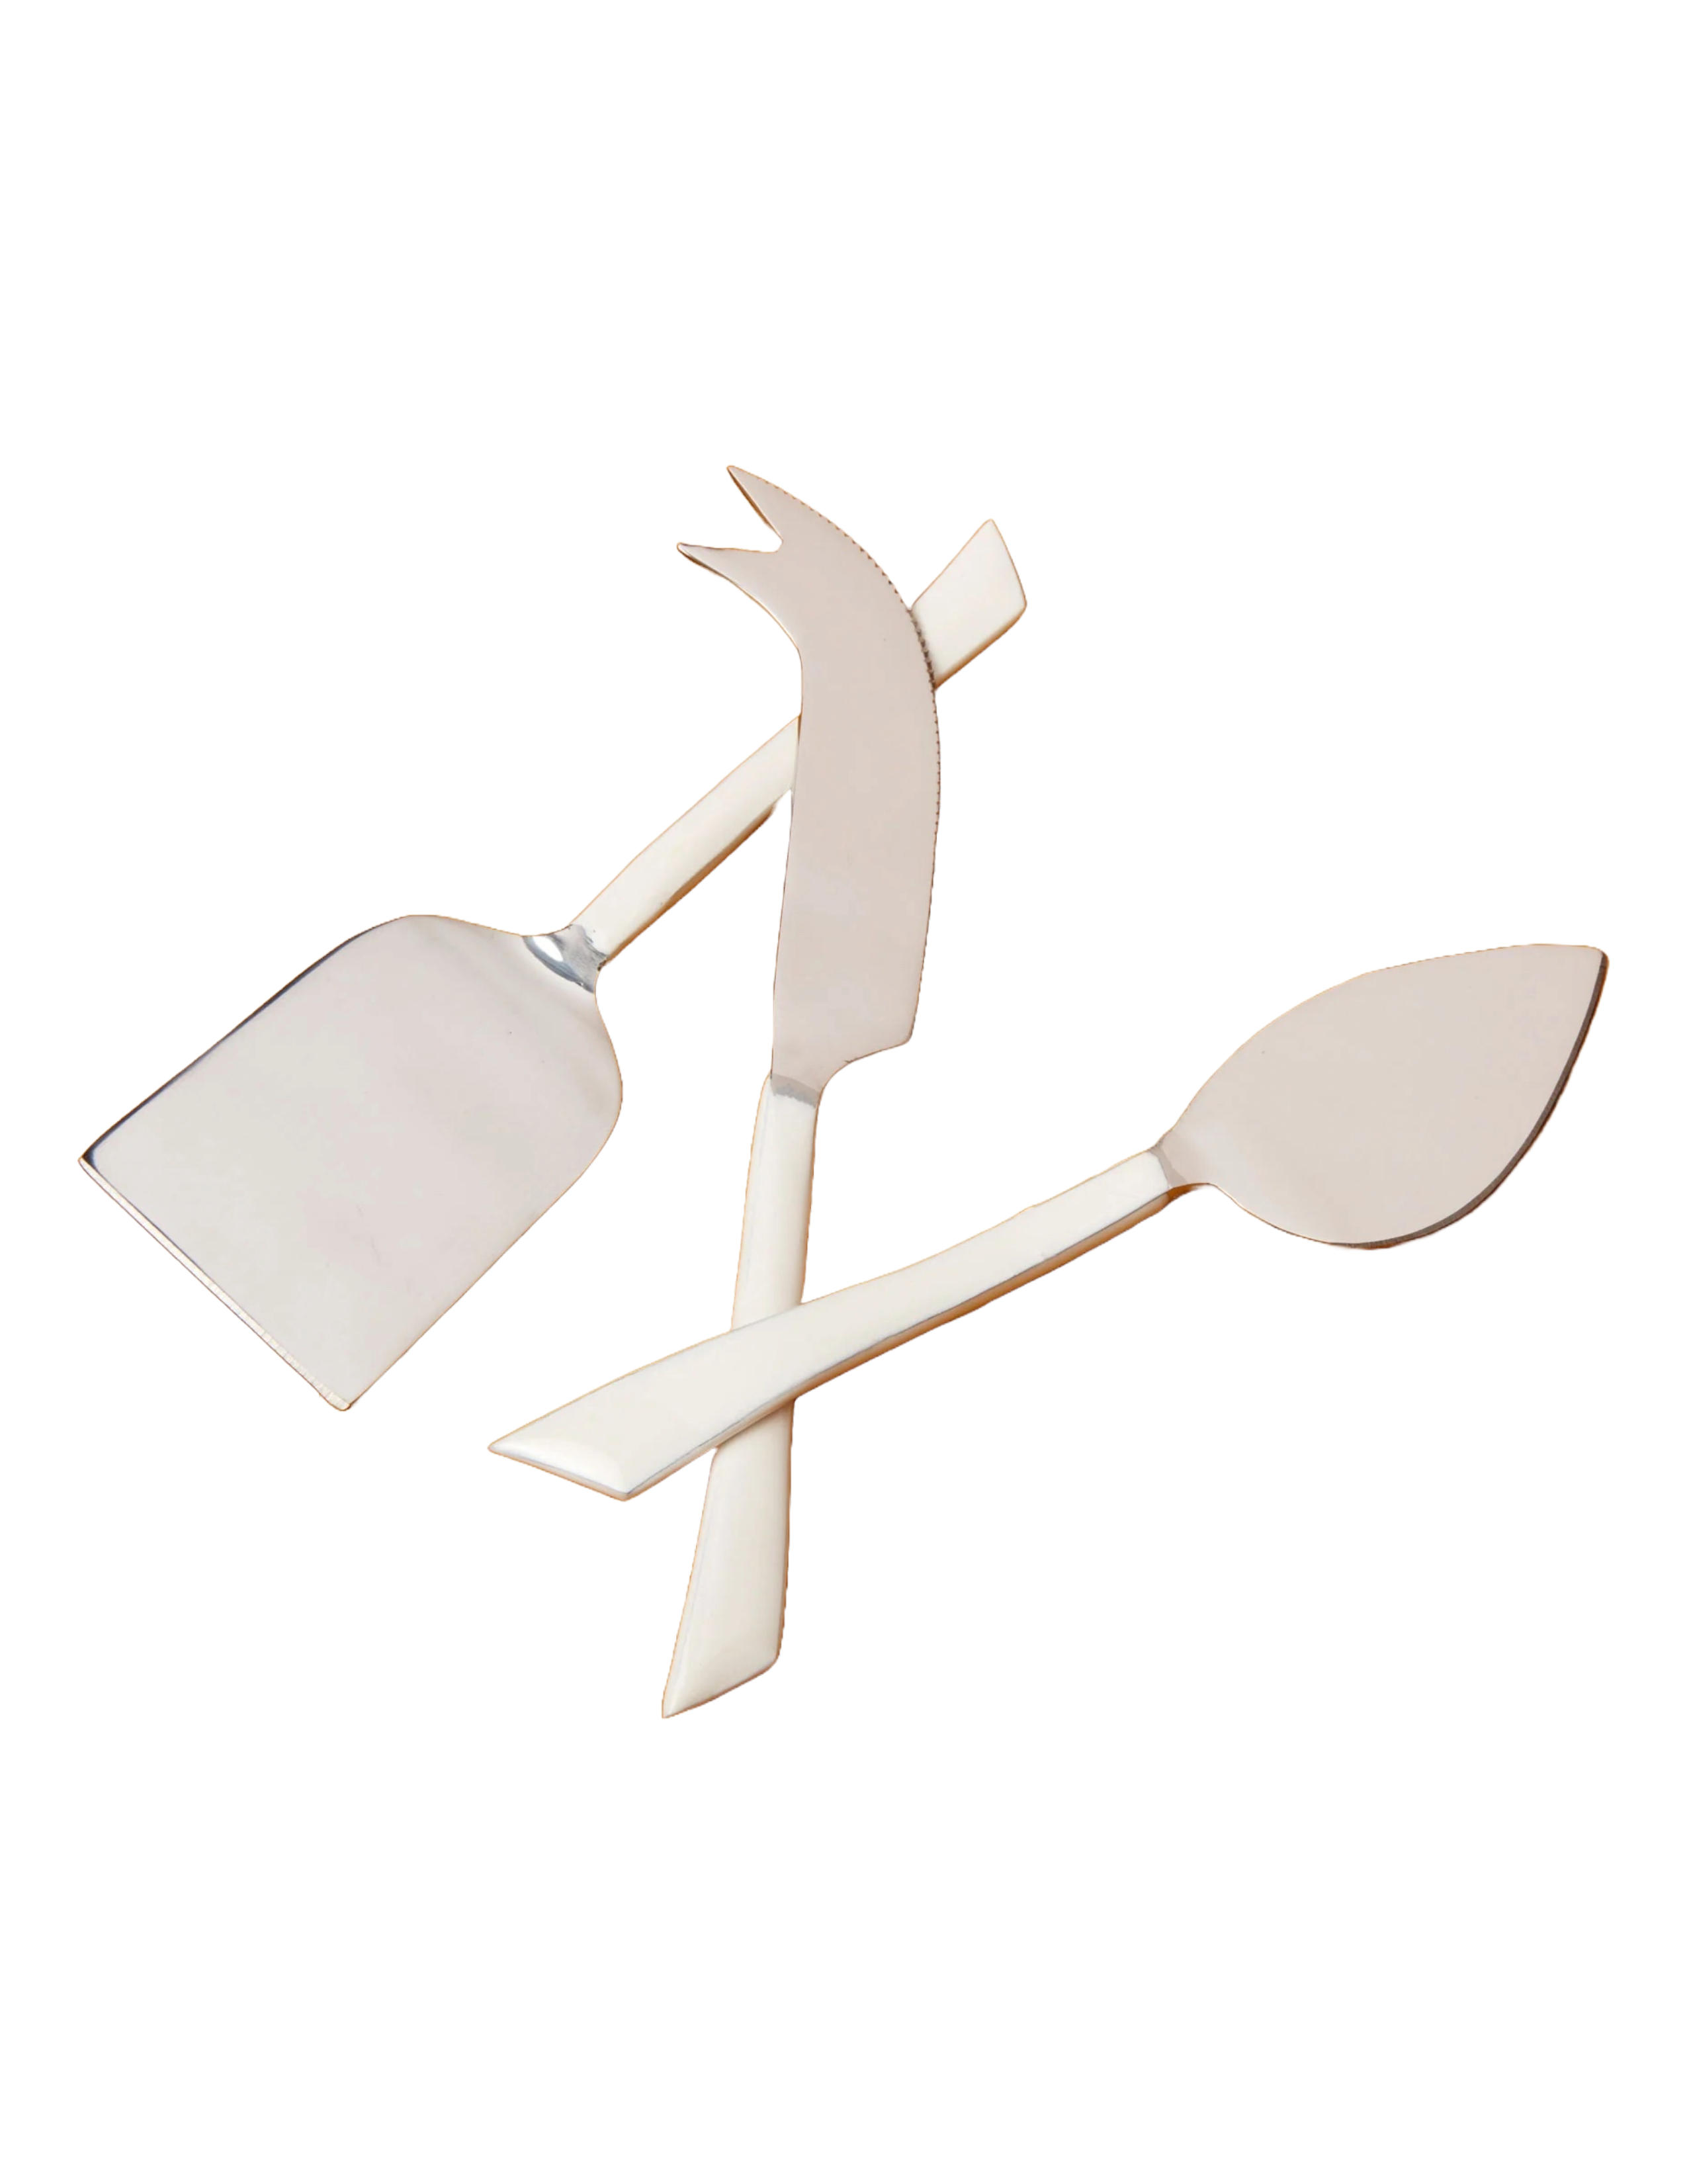 Stainless & White Dipped Enamel Cheese Knife Set of 3